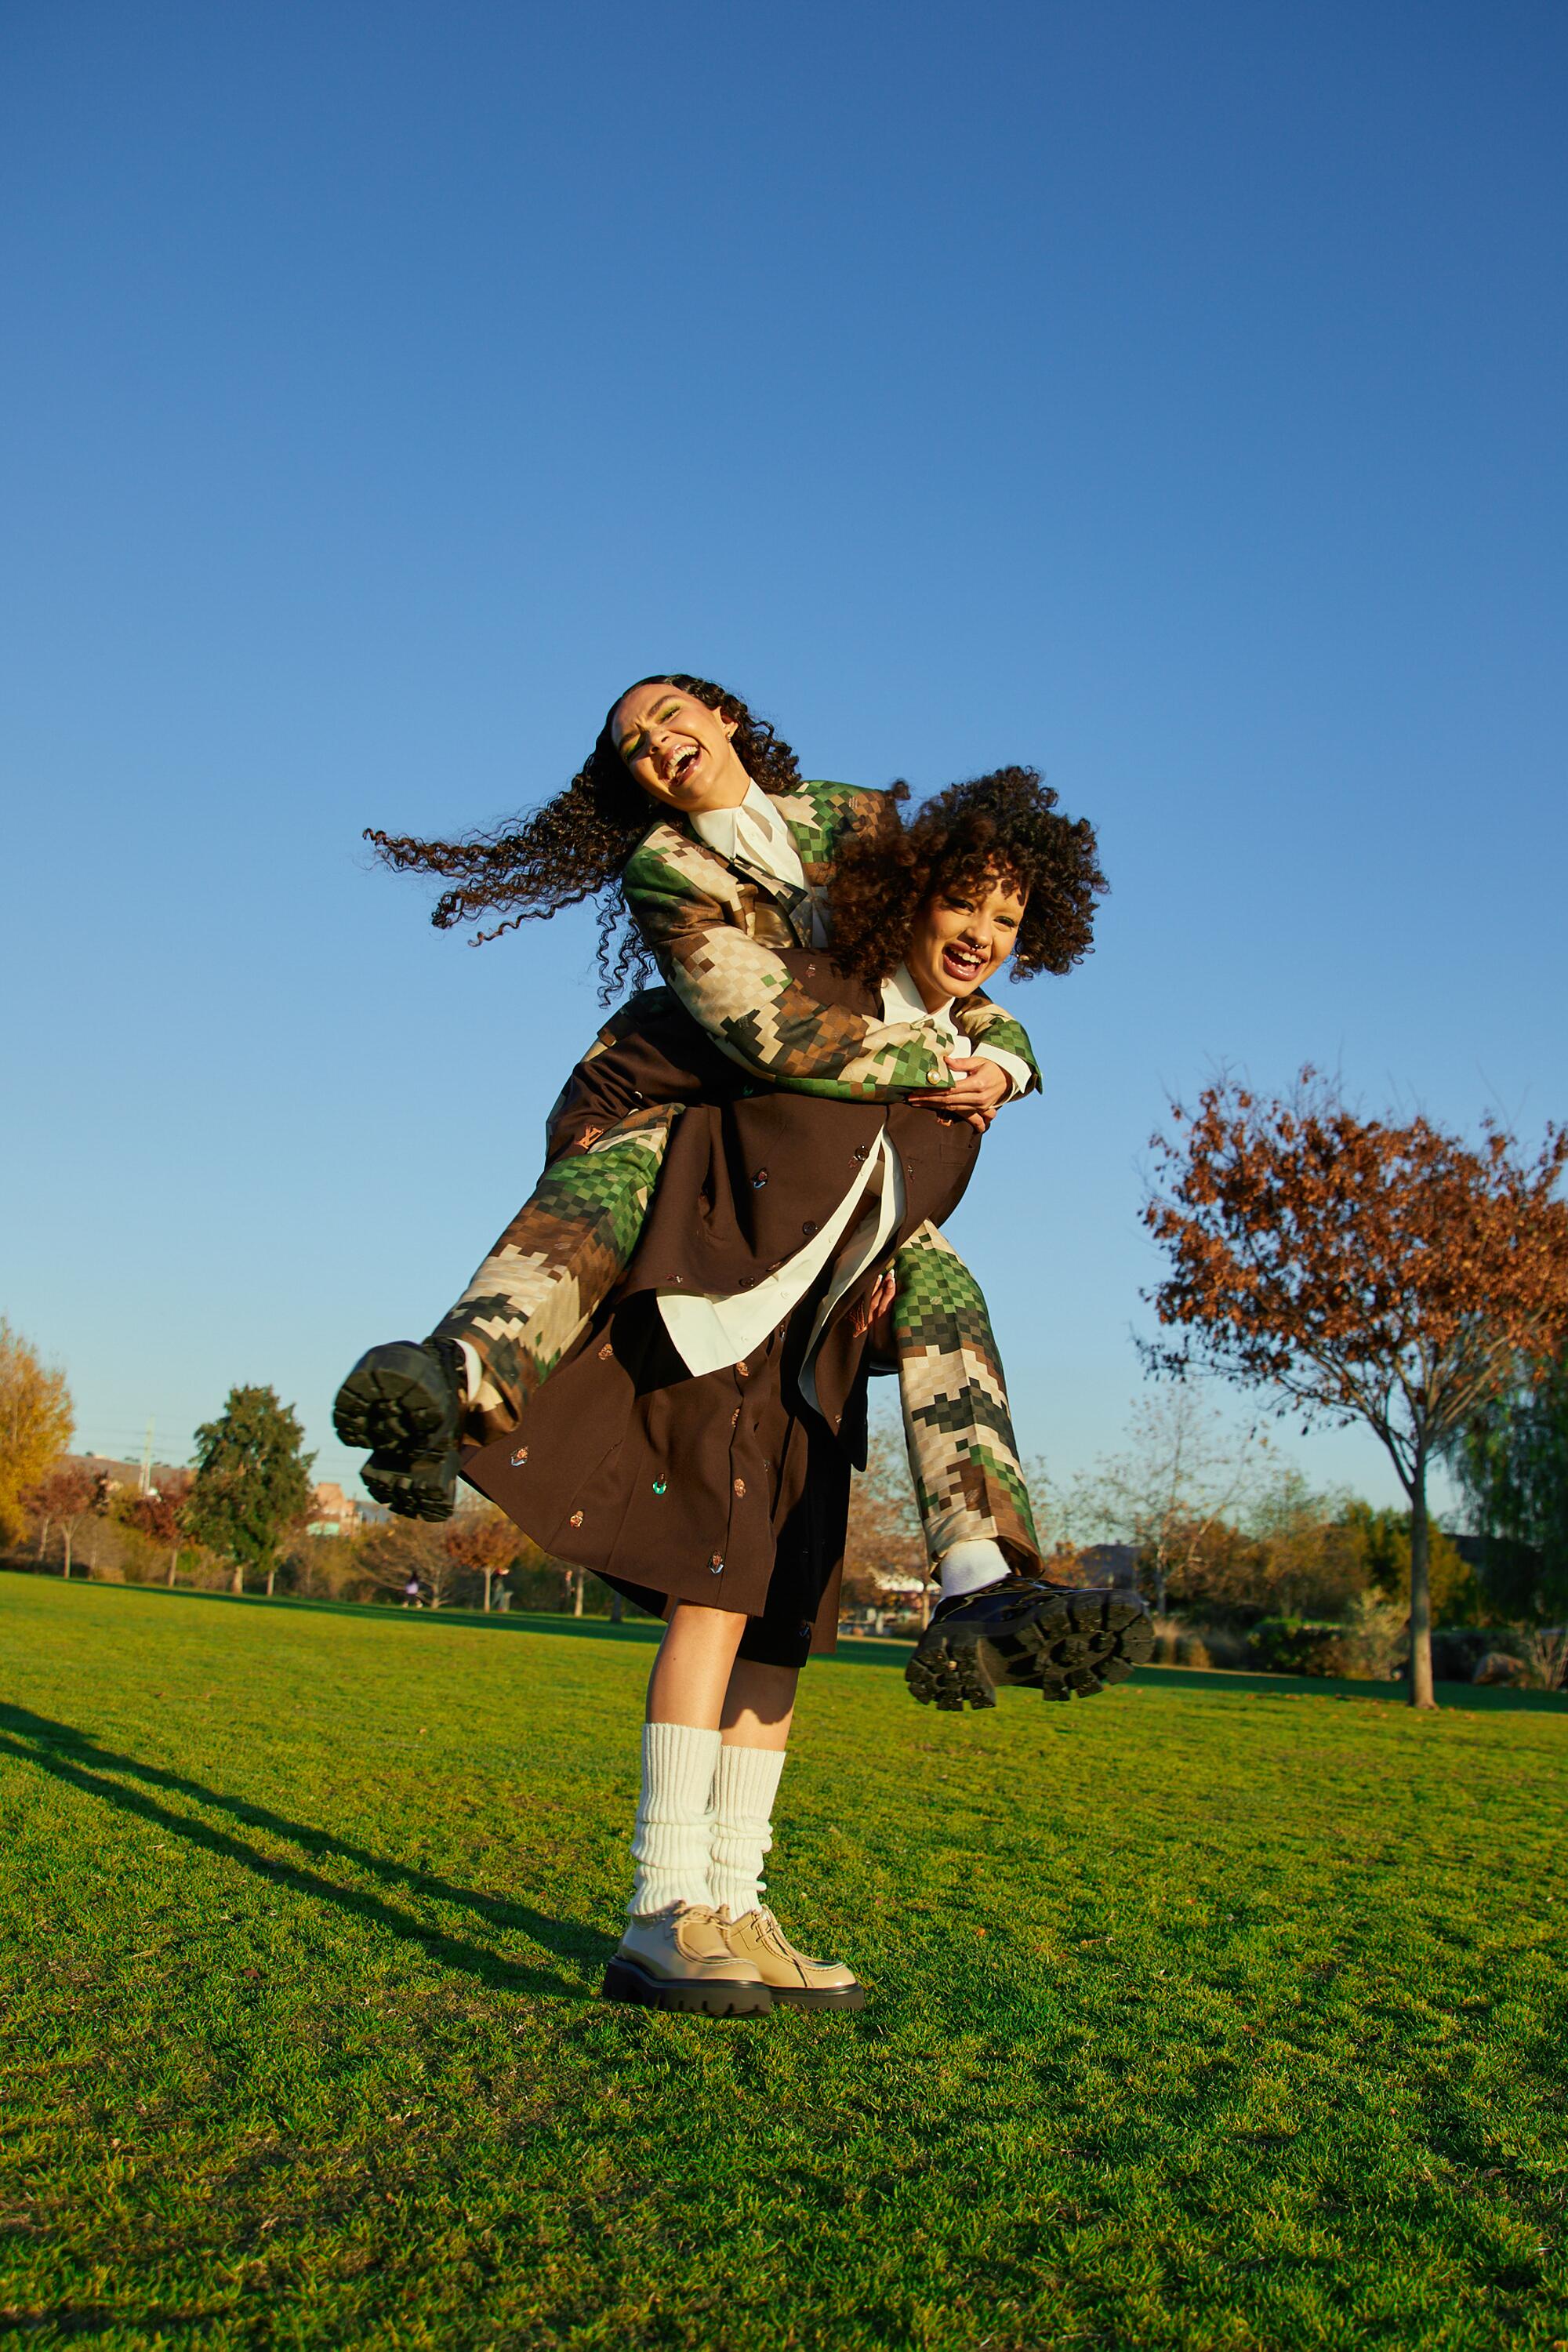 Two models hug each other in a park.